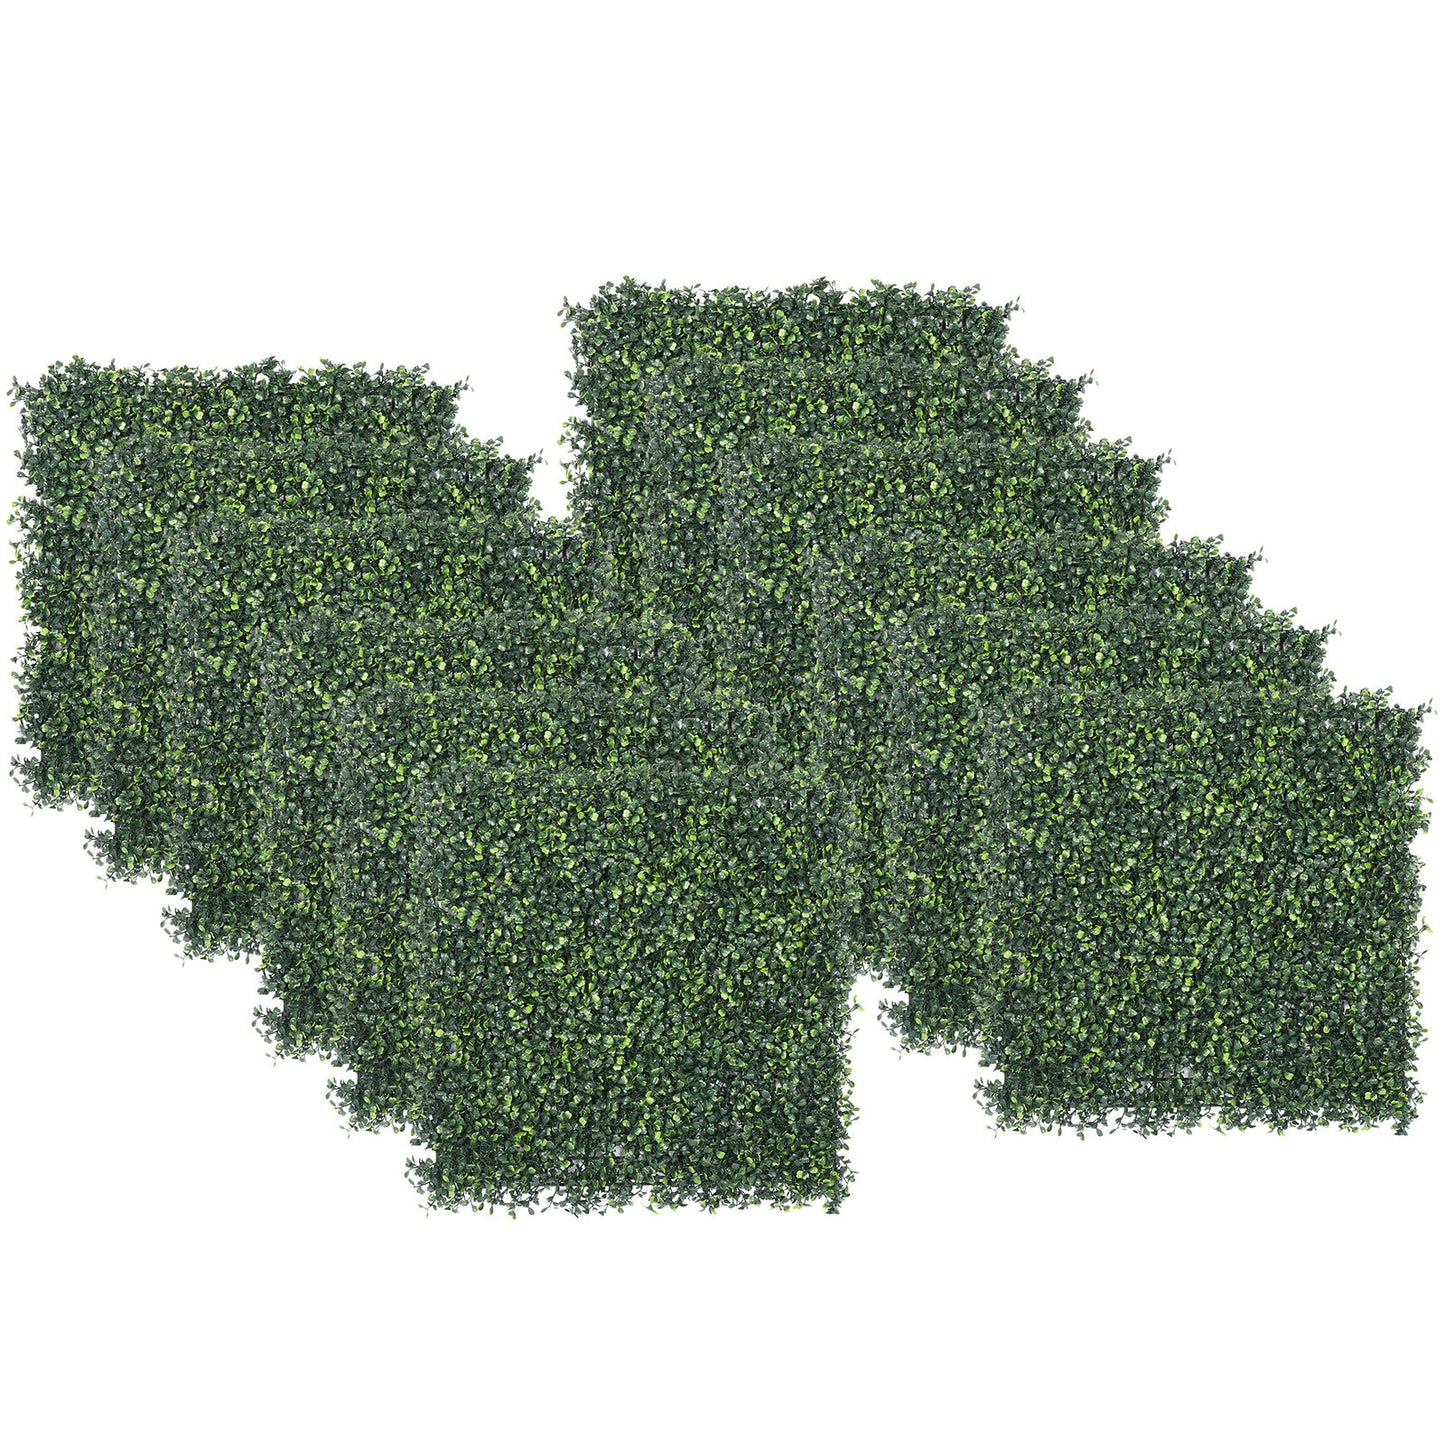 12pcs Artificial Boxwood Mat Wall Hedge Decor Privacy Fence Panels Grass 20x20"